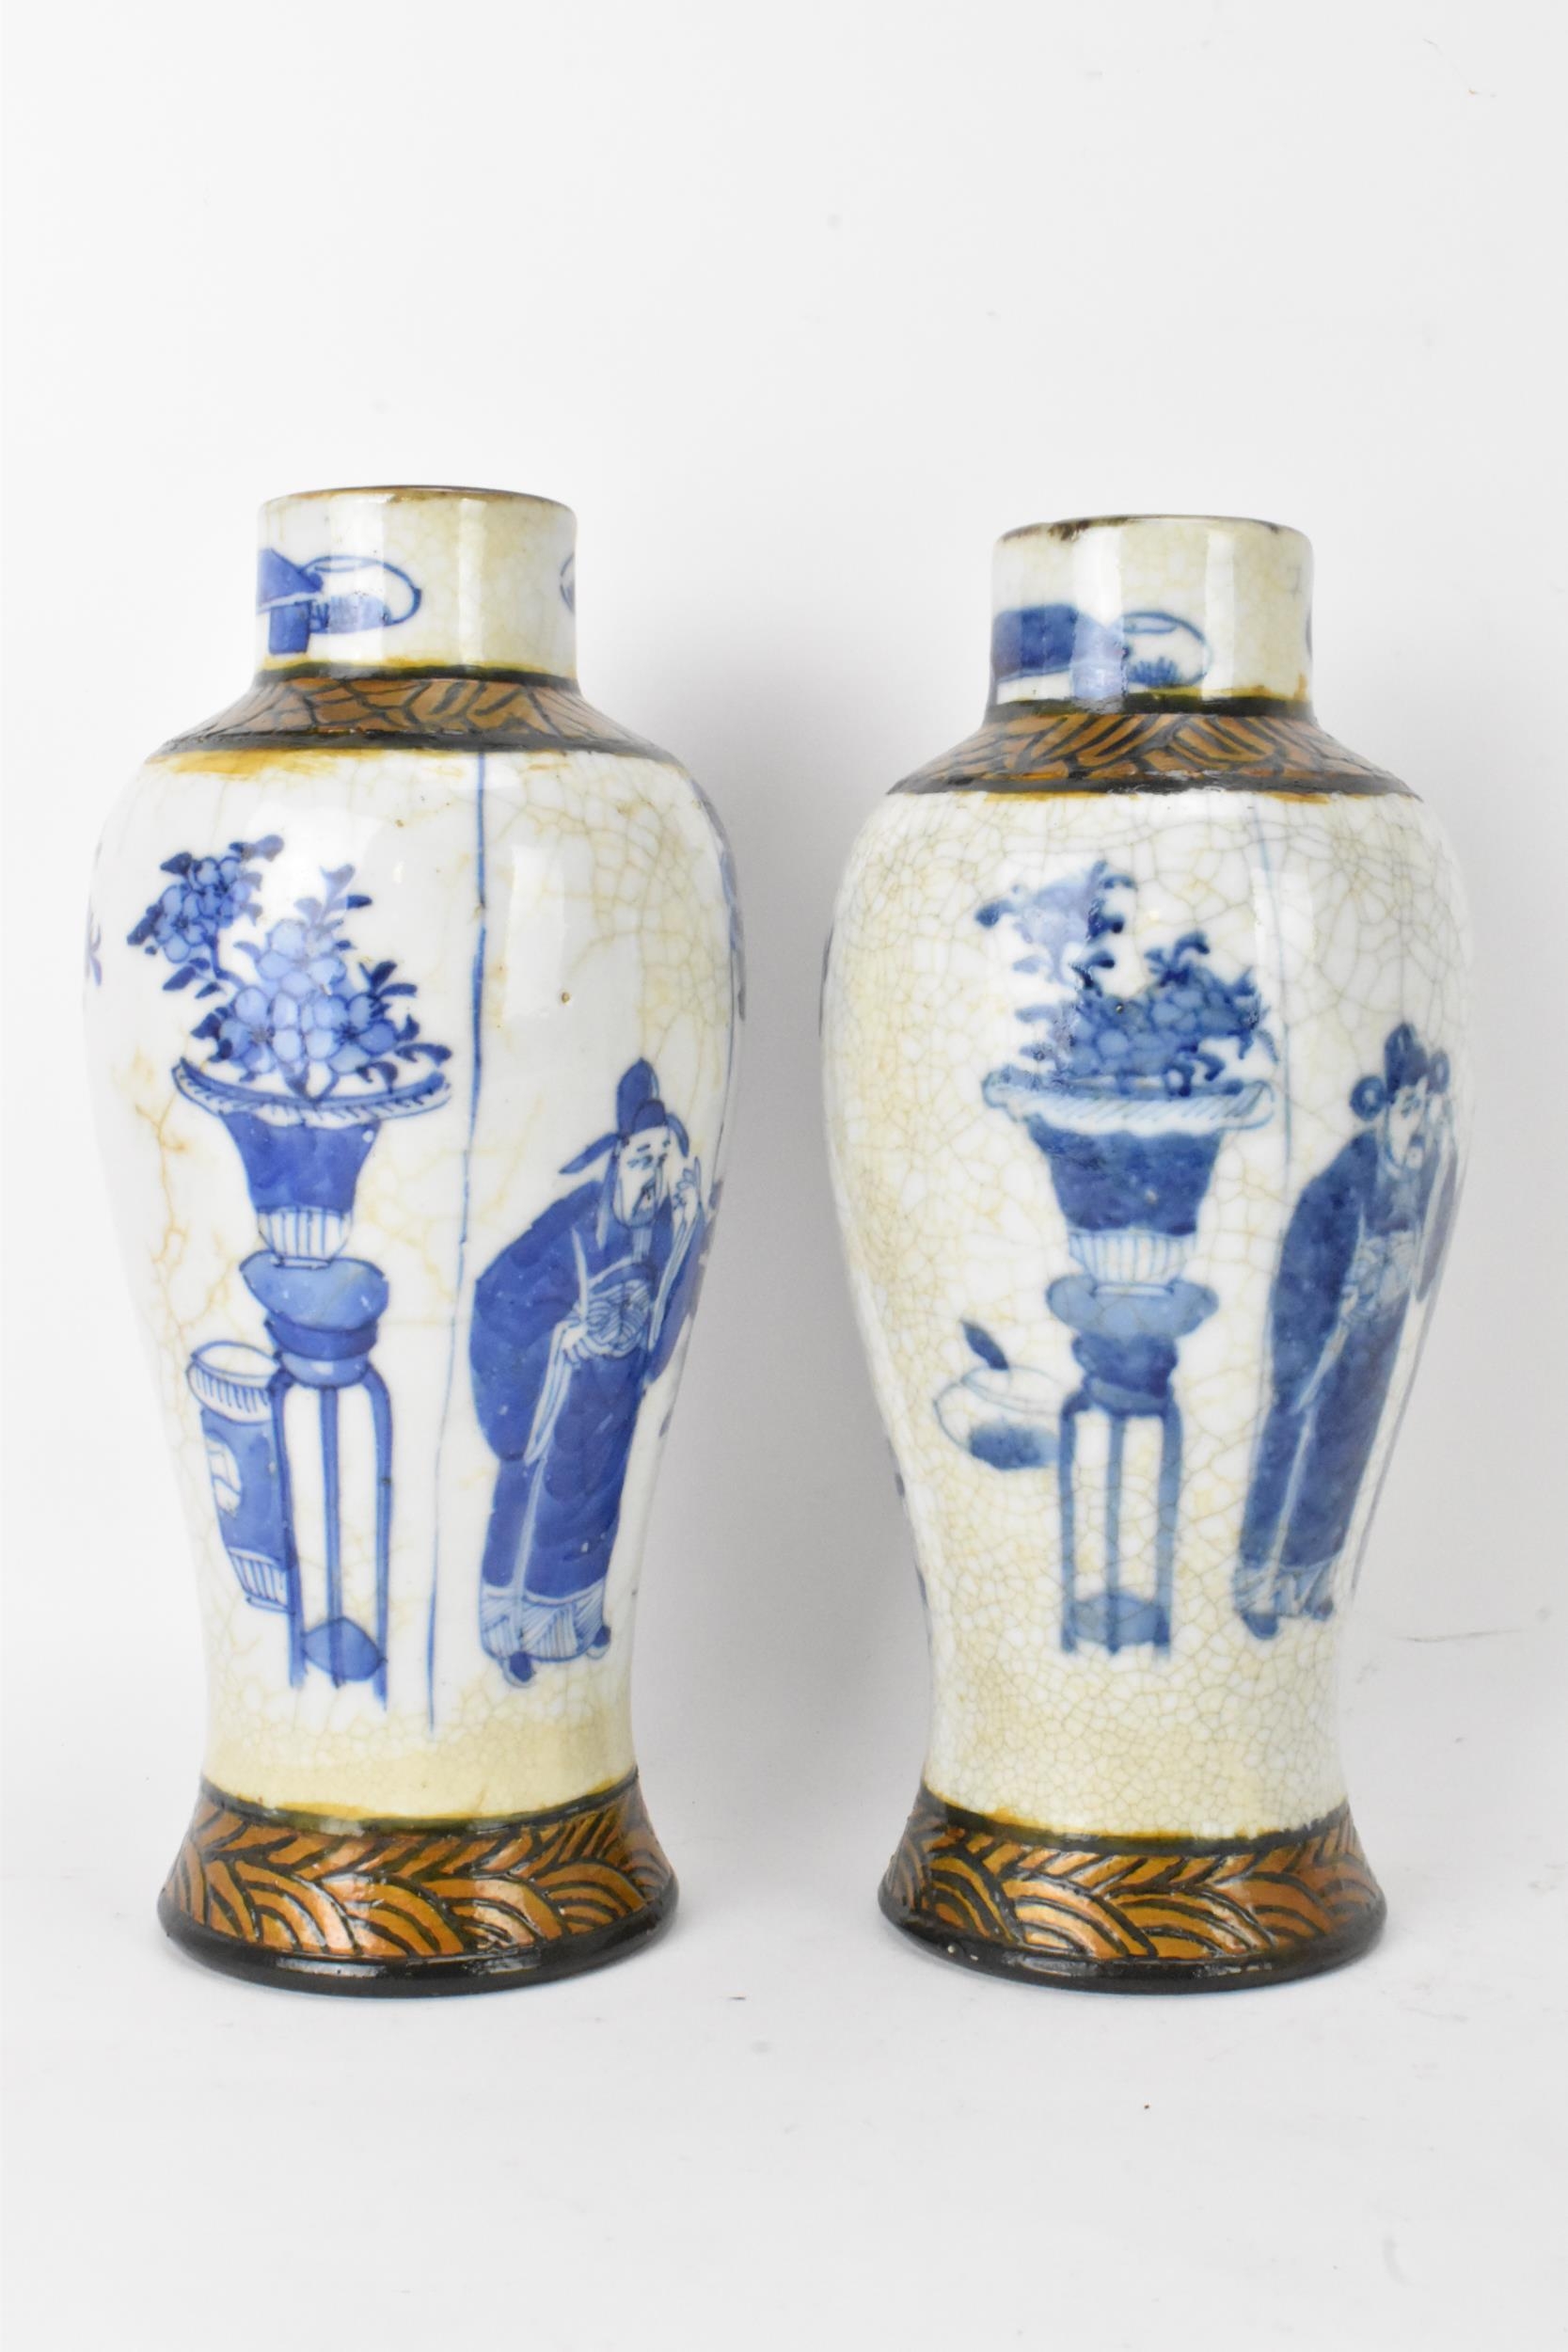 A pair of Chinese Nanking crackle glazed vases blue and white vases, Qing dynasty, 19th century, - Image 4 of 6